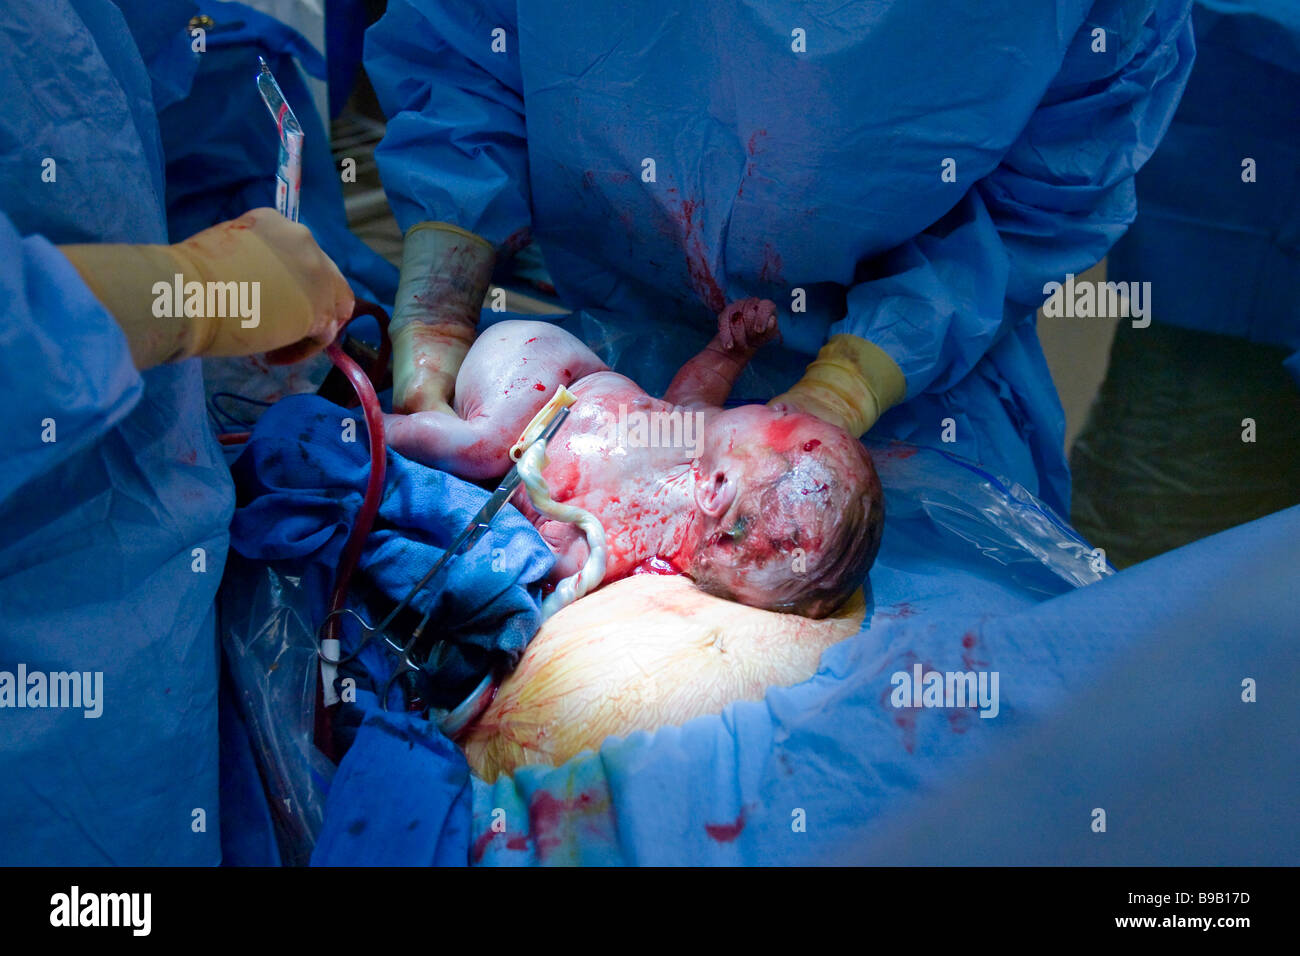 Baby being delivered by caesarean section. Stock Photo